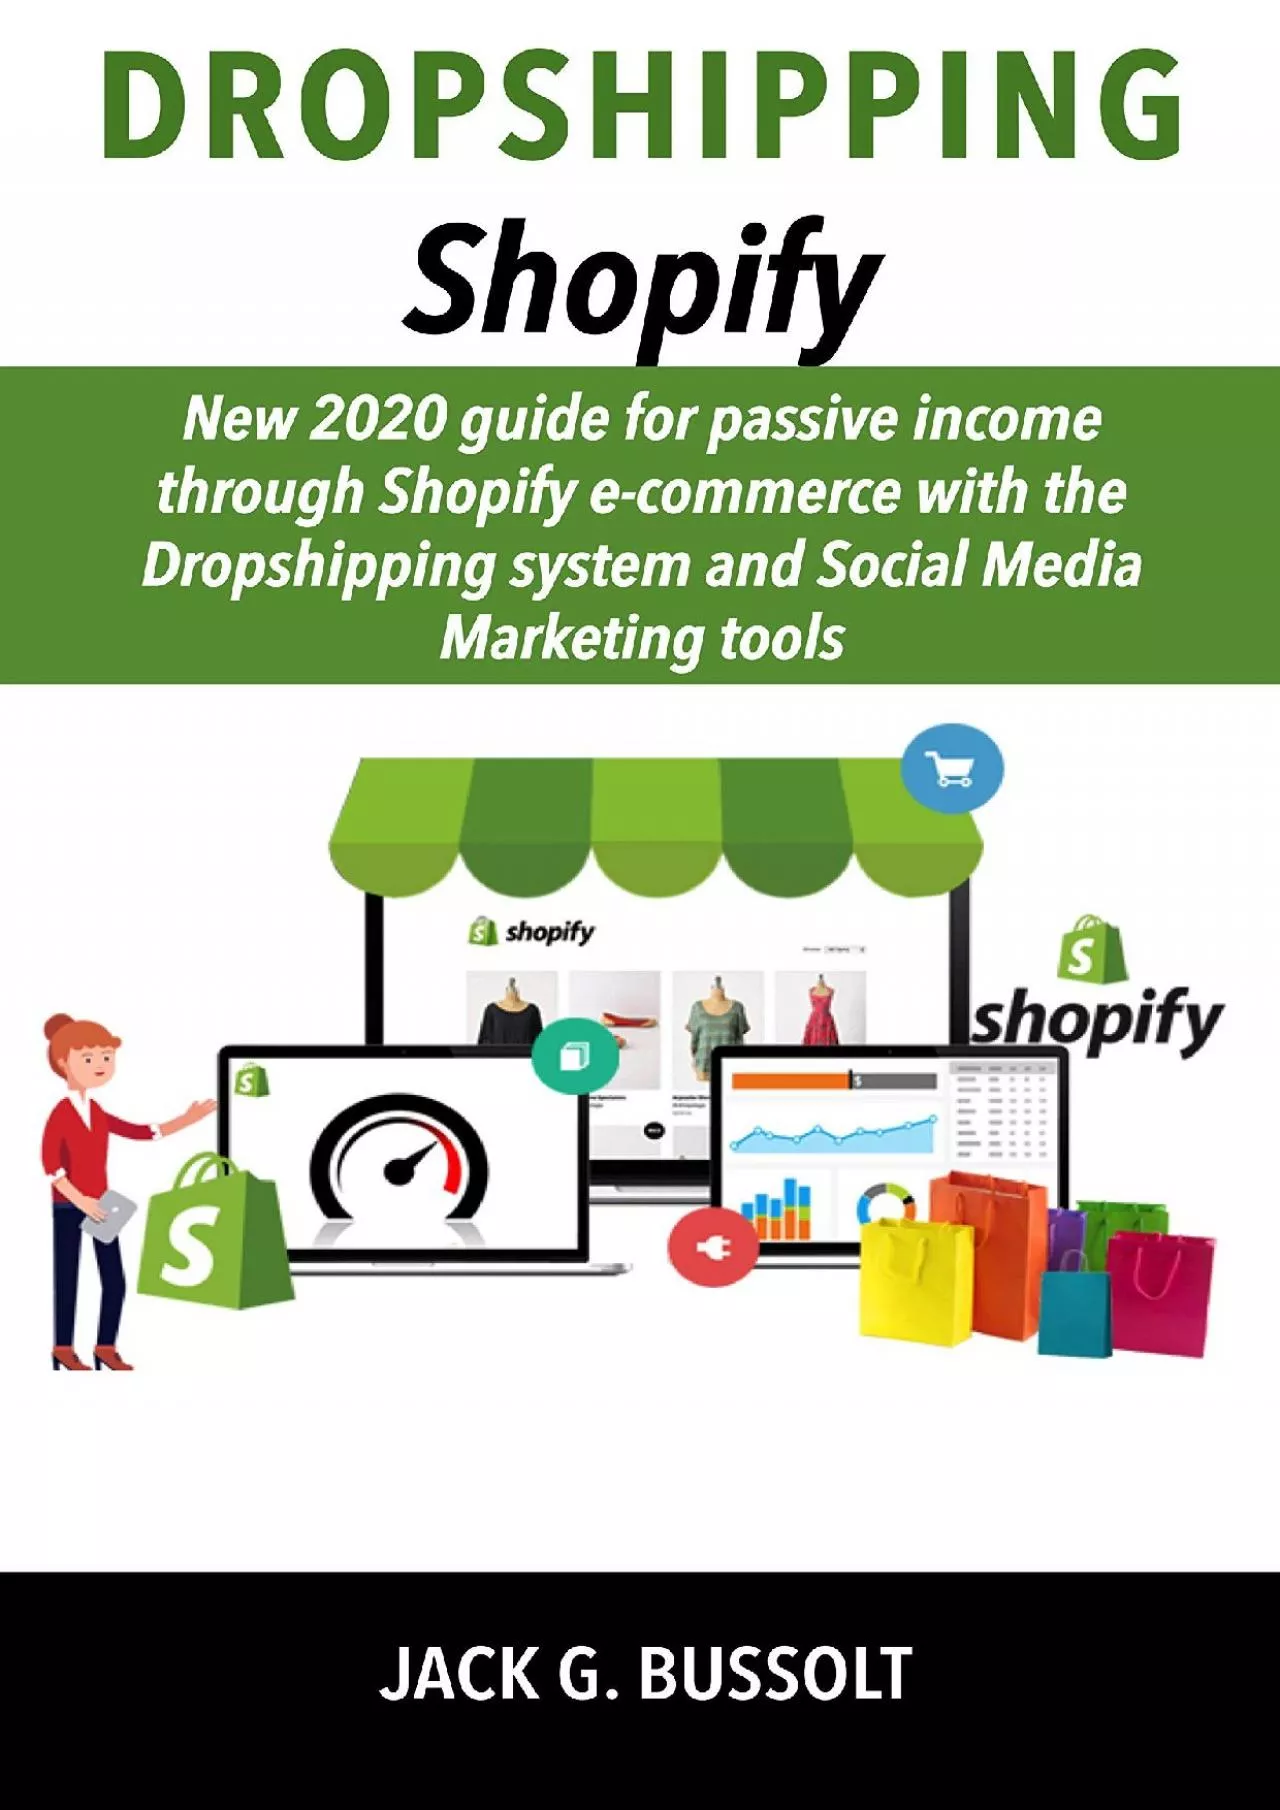 Dropshipping Shopify: New 2020 Guide for Passive Income through Shopify e-commerce with